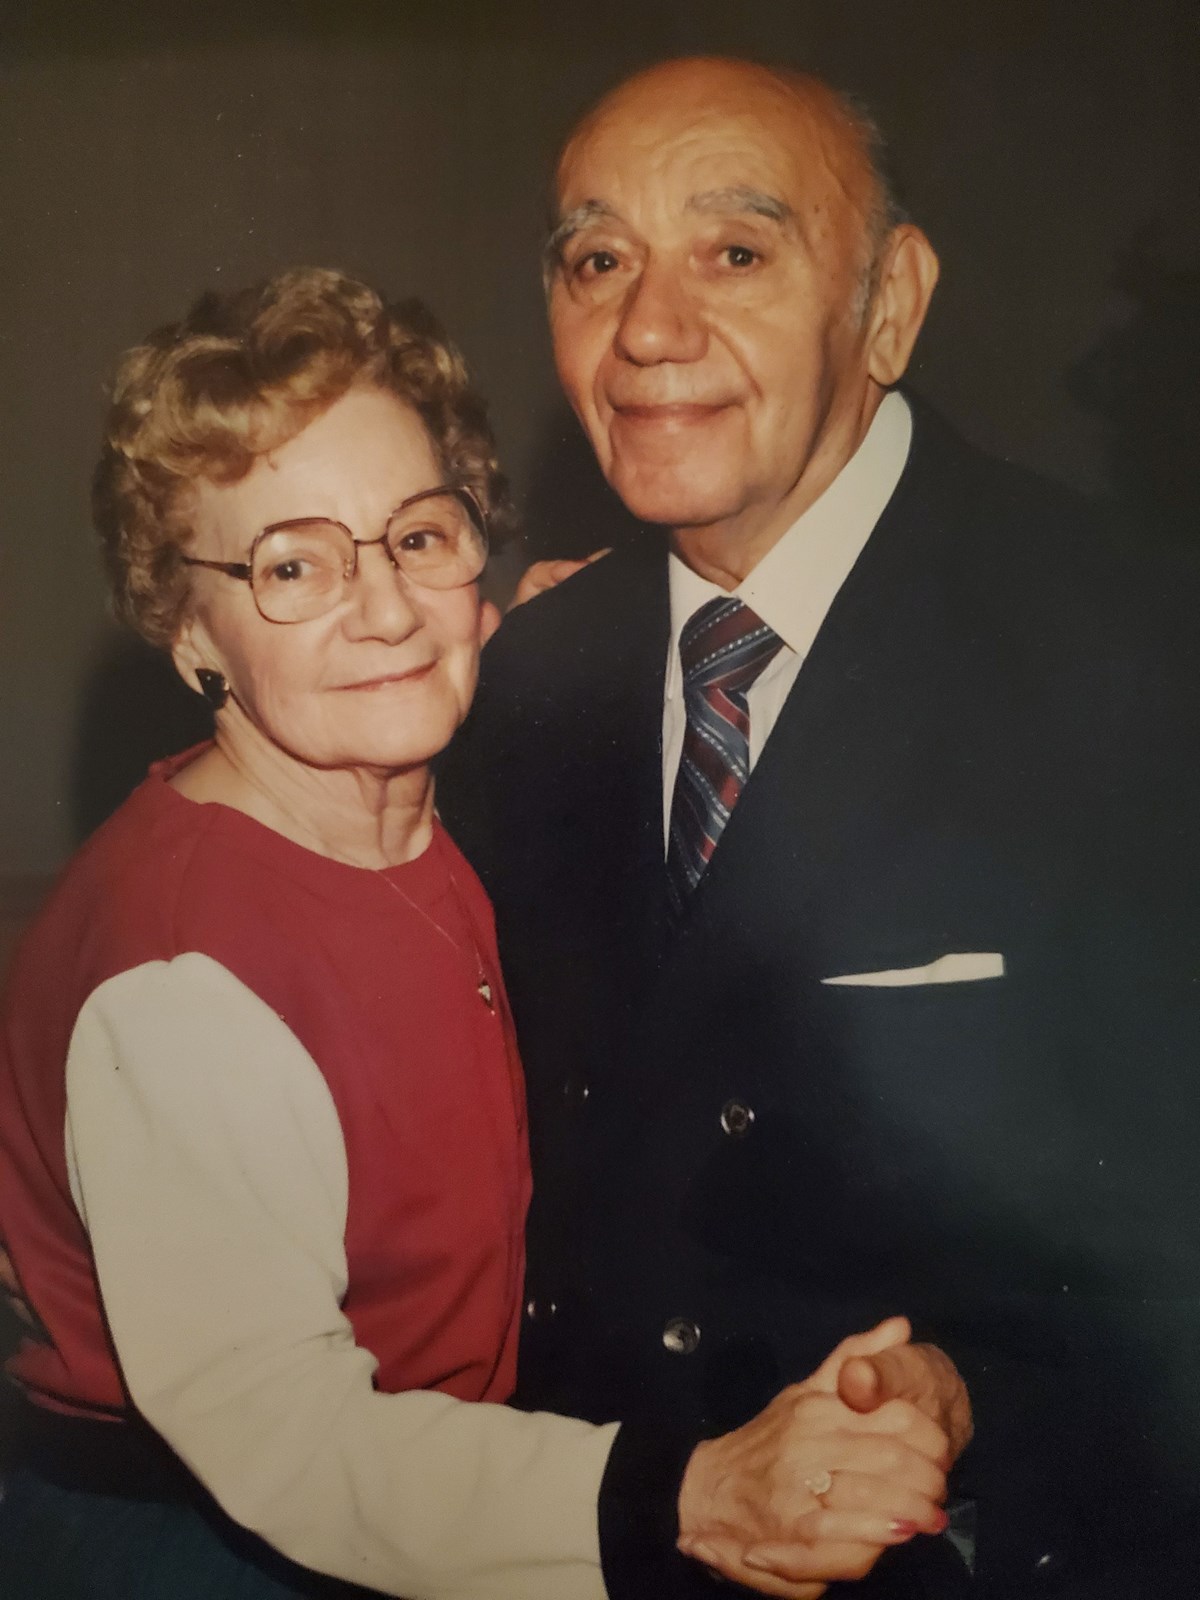 Leo and Helen Givonetti, an elderly Italian couple wearing nice clothes smiling at the camera while posing as if dancing.